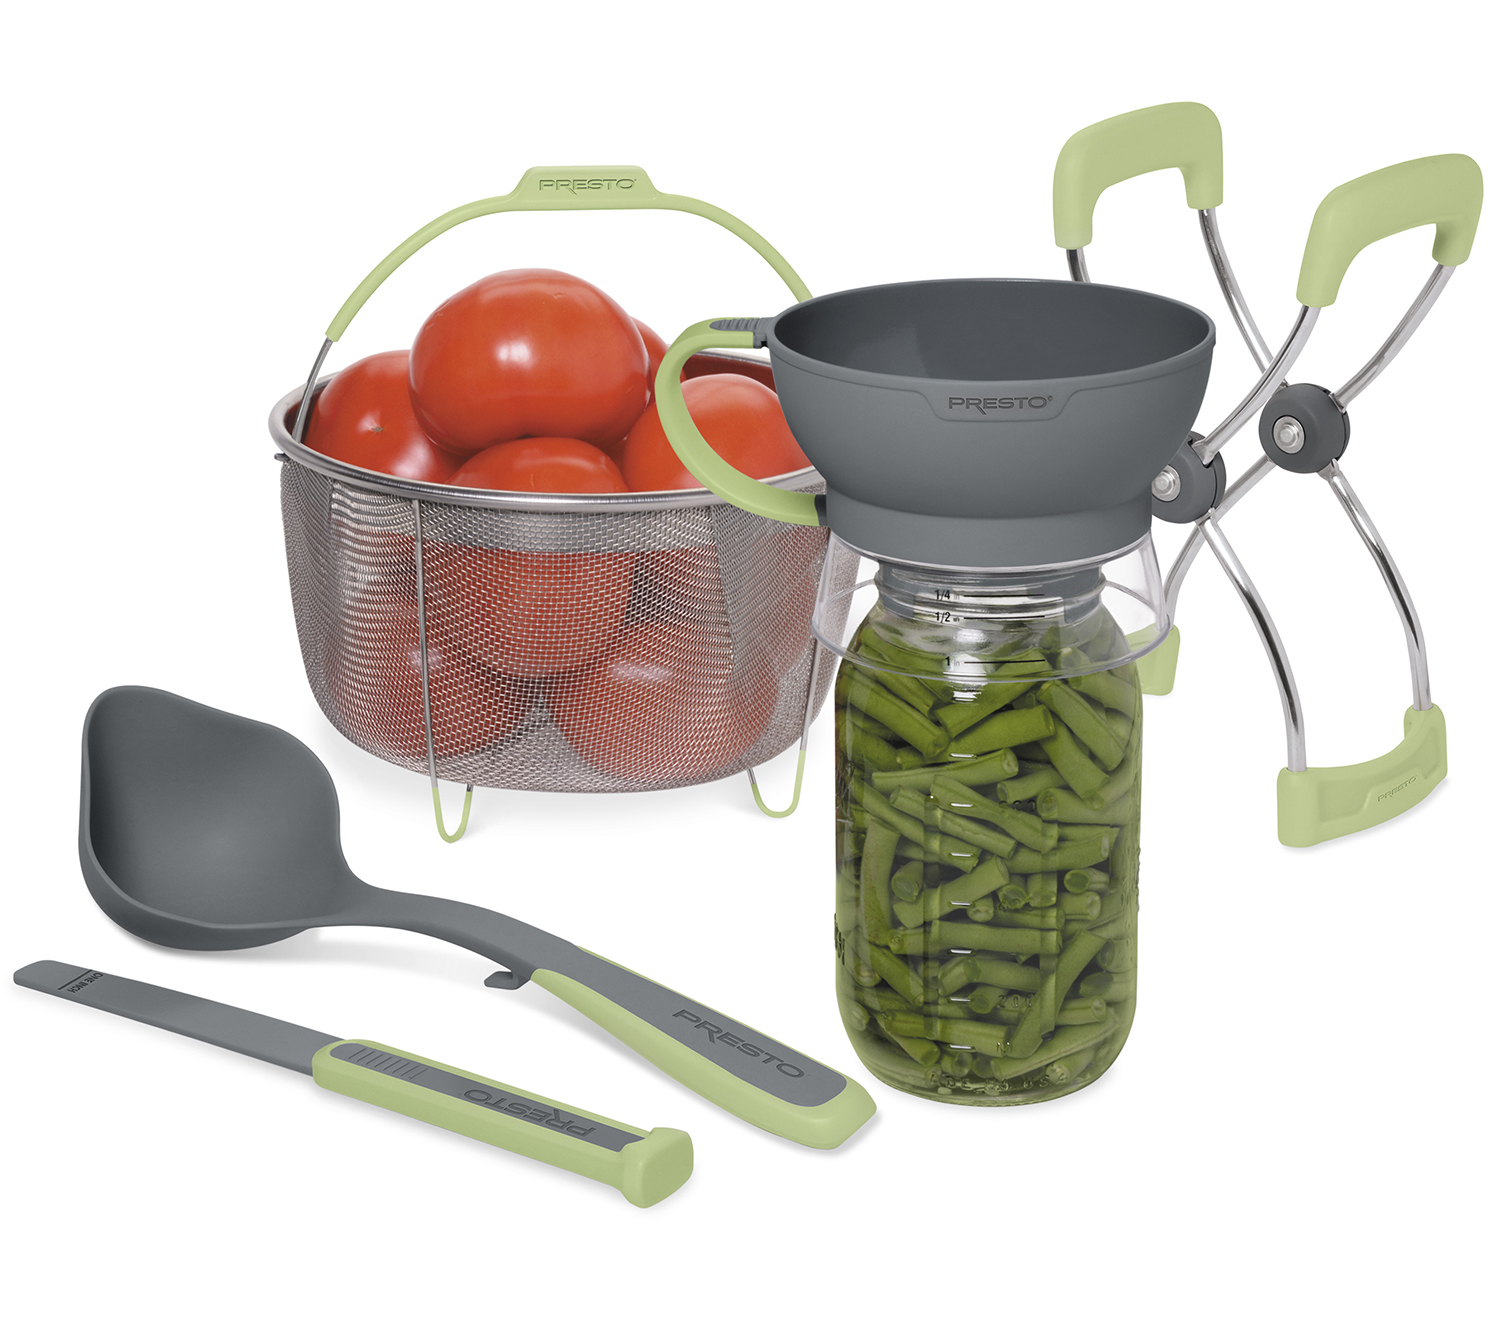 Large Batch Home Canning Tool Set